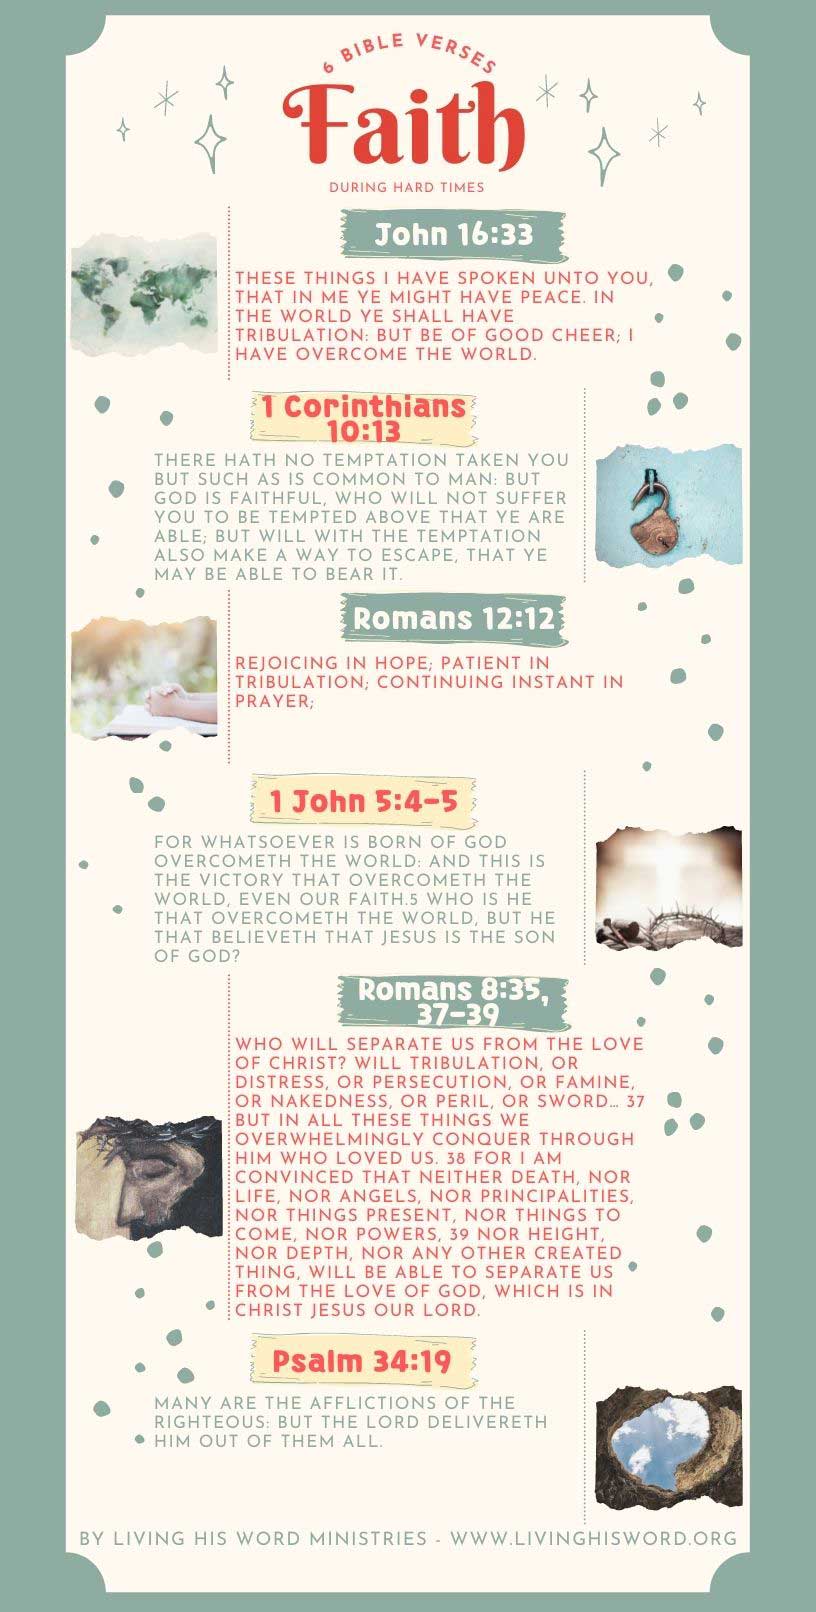 6-helpful-bible-verses-on-faith-in-hard-times-a word-of-encouragement-graphics